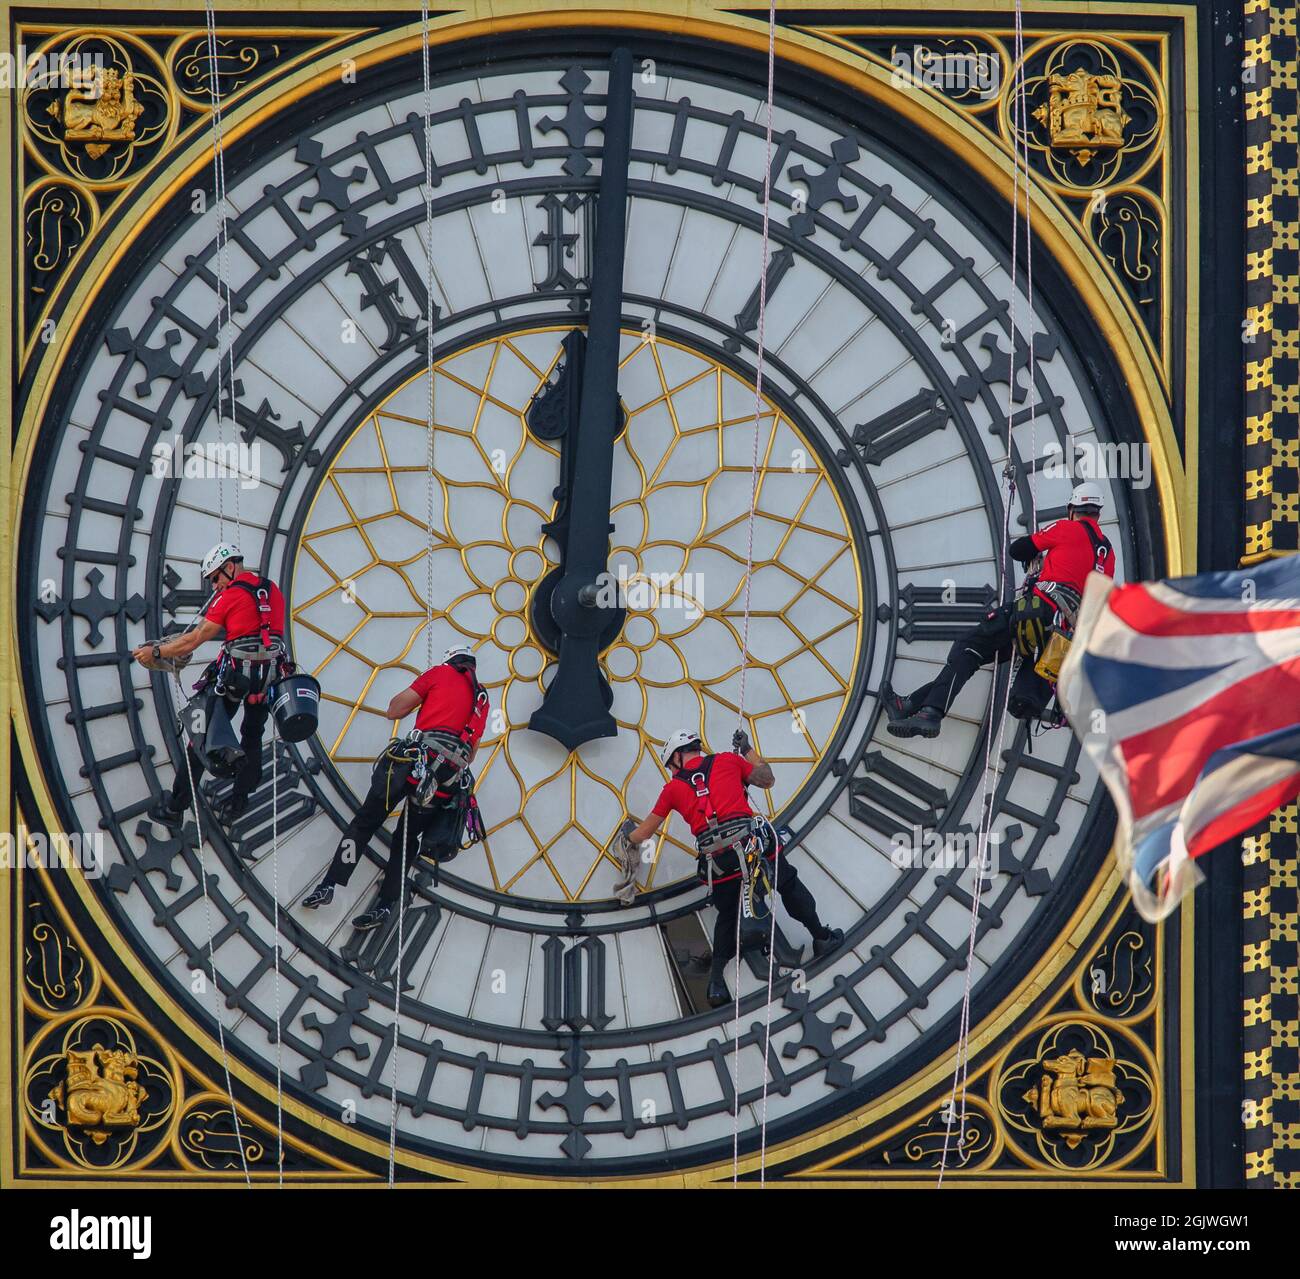 The Clock face of the Elizabeth Tower also known as Big Ben receives a long awaited clean. Stock Photo